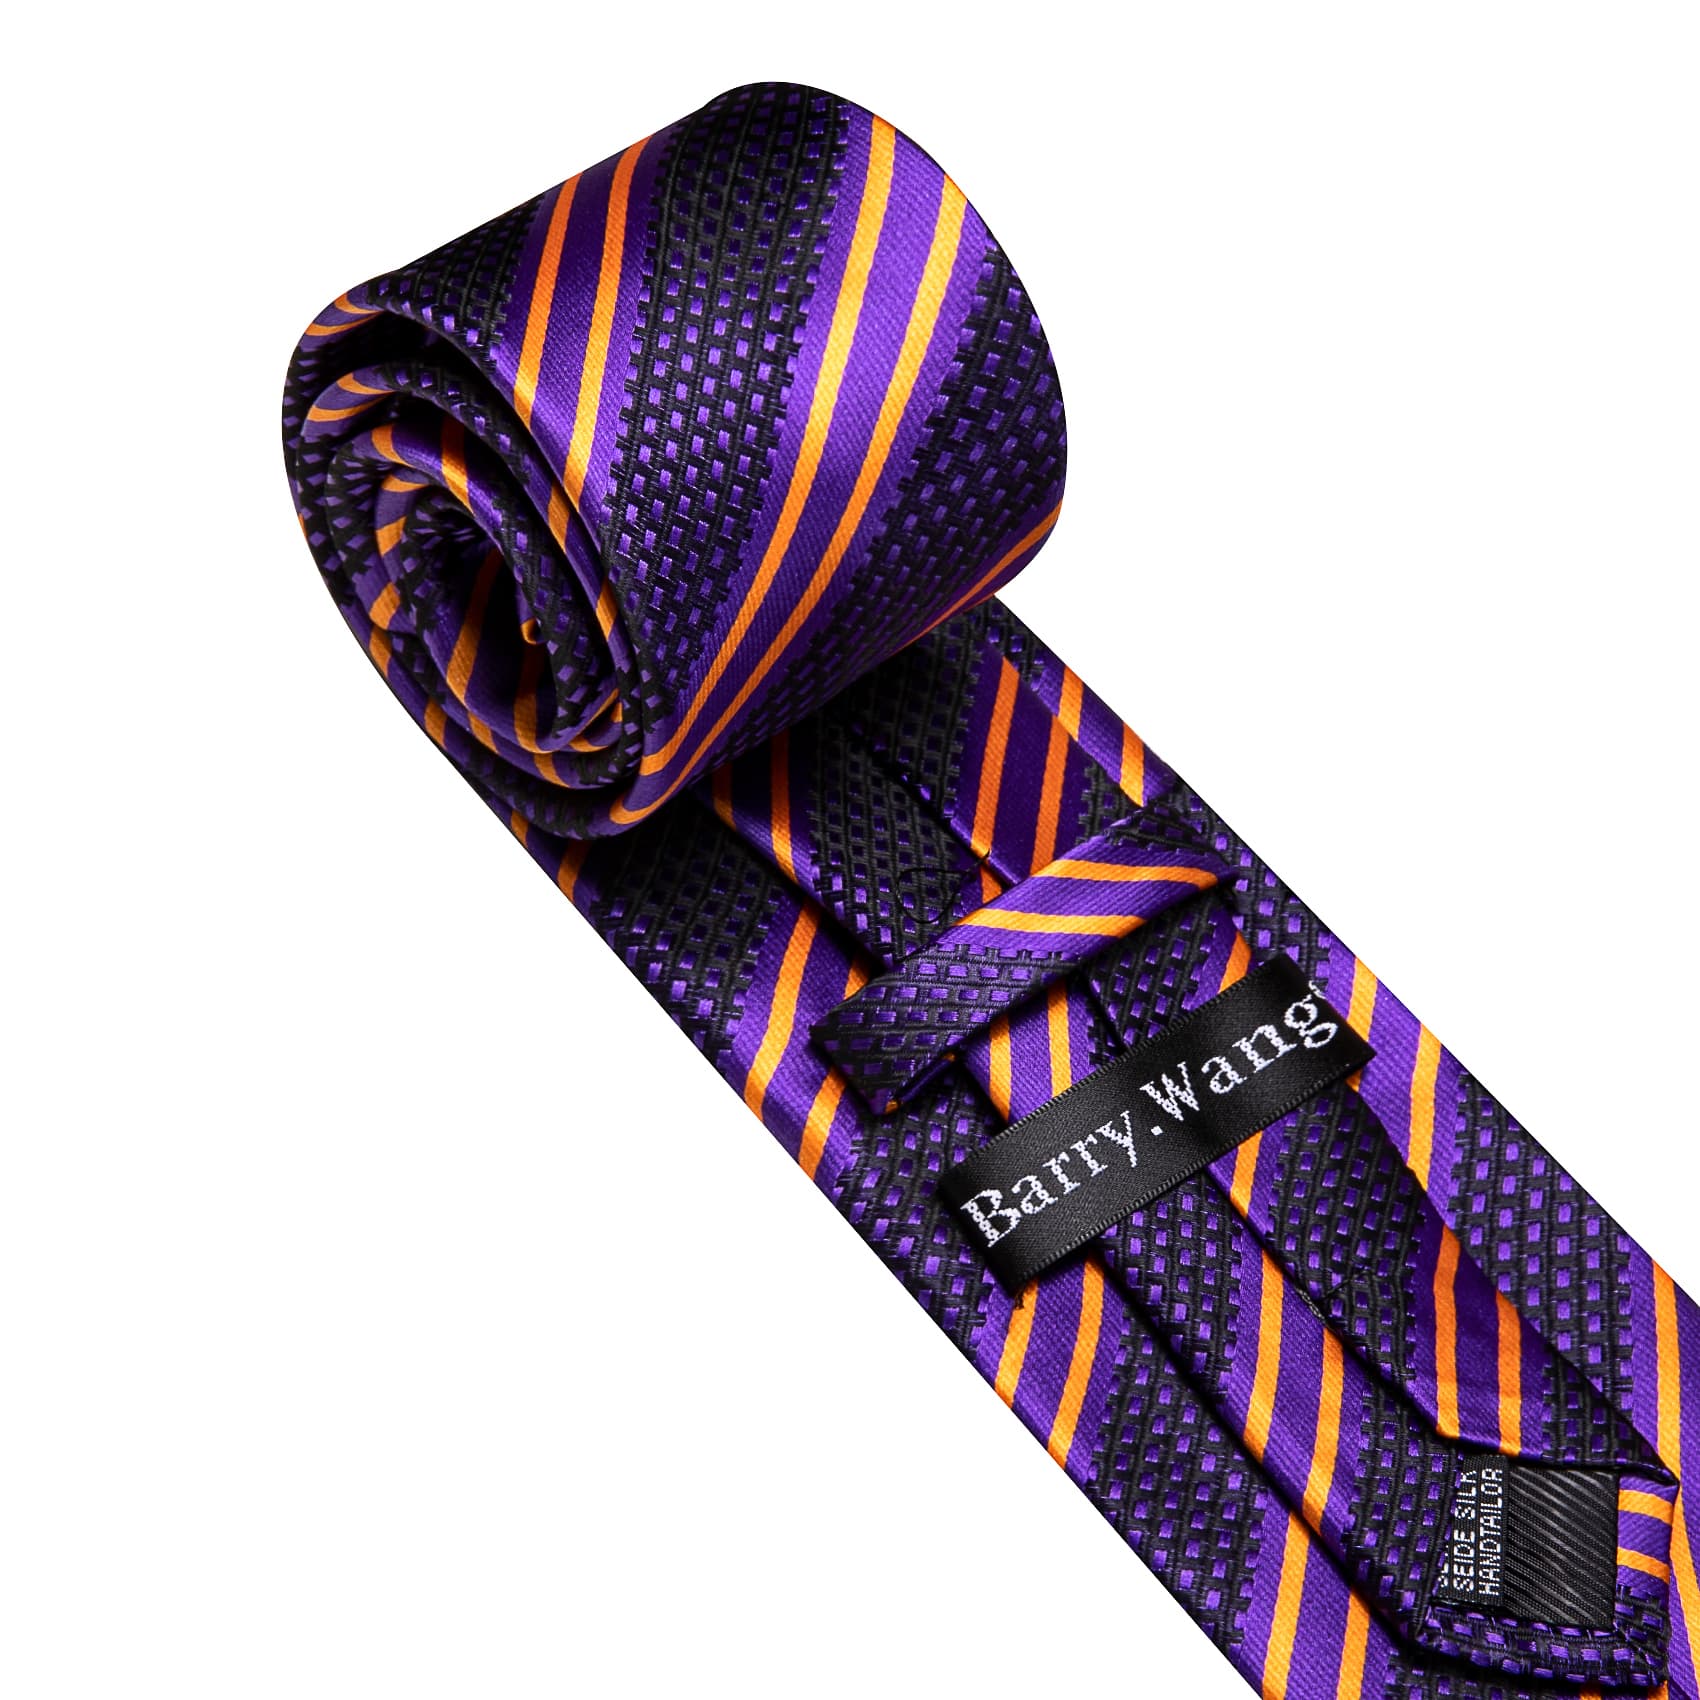 Barry Wang Mens Striped Tie Purple Necktie Set with Yellow Stripes